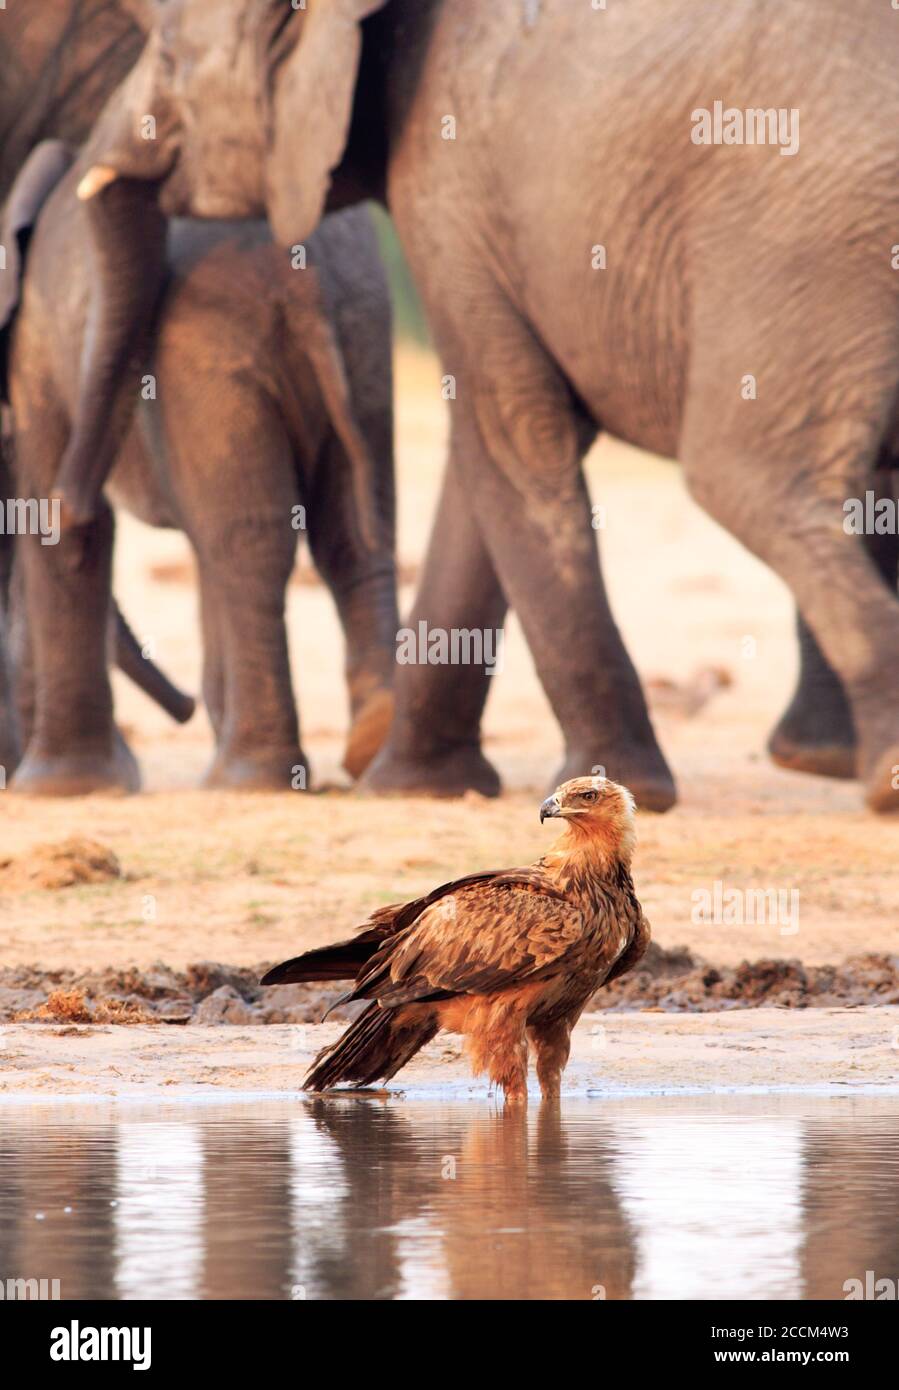 A Tawny Eagle standing at the edge of a waterhole with elephants in the background - Hwange National Park Zimbabwe Stock Photo